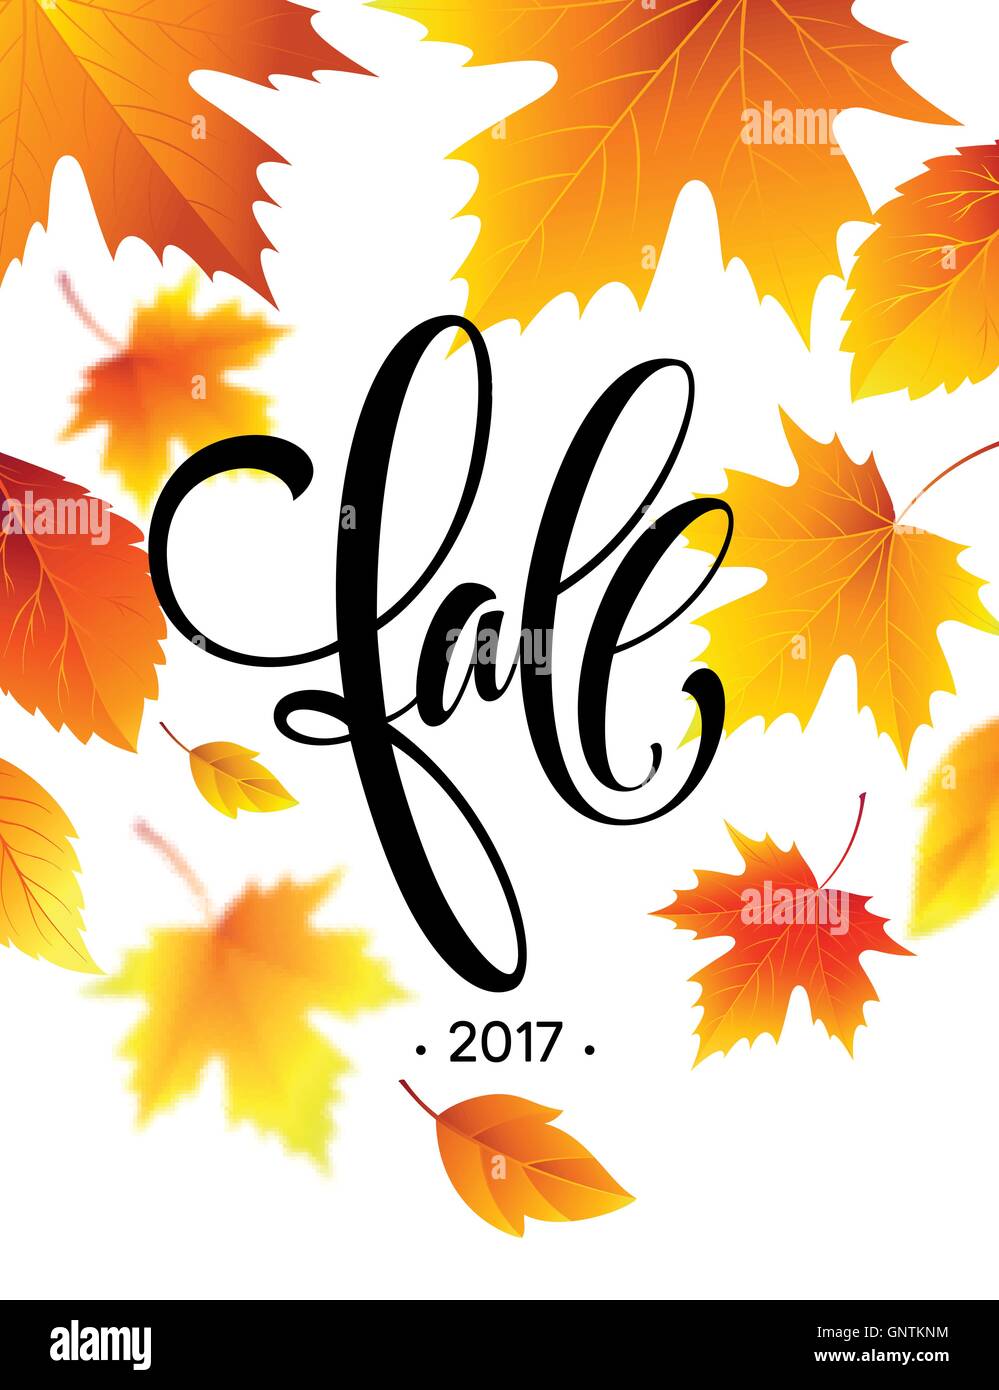 Autumn calligraphy. Background of Fall leaves. Concept leaflet, flyer, poster advertising. Vector illustration Stock Vector